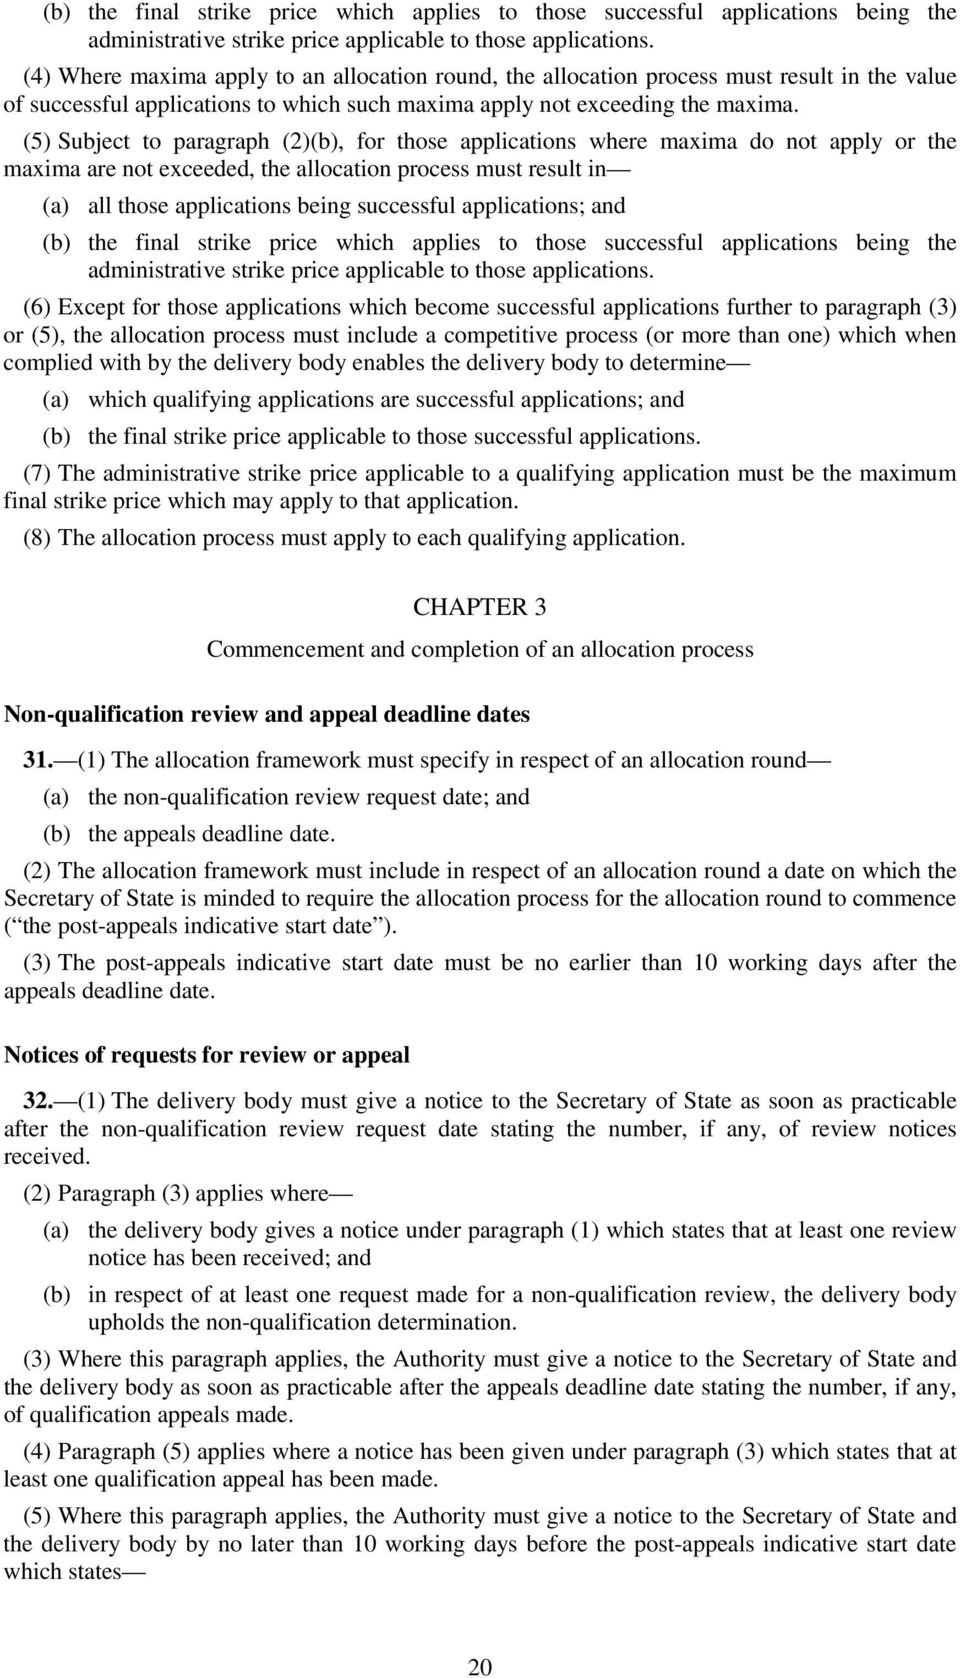 (5) Subject to paragraph (2)(b), for those applications where maxima do not apply or the maxima are not exceeded, the allocation process must result in (a) all those applications being successful